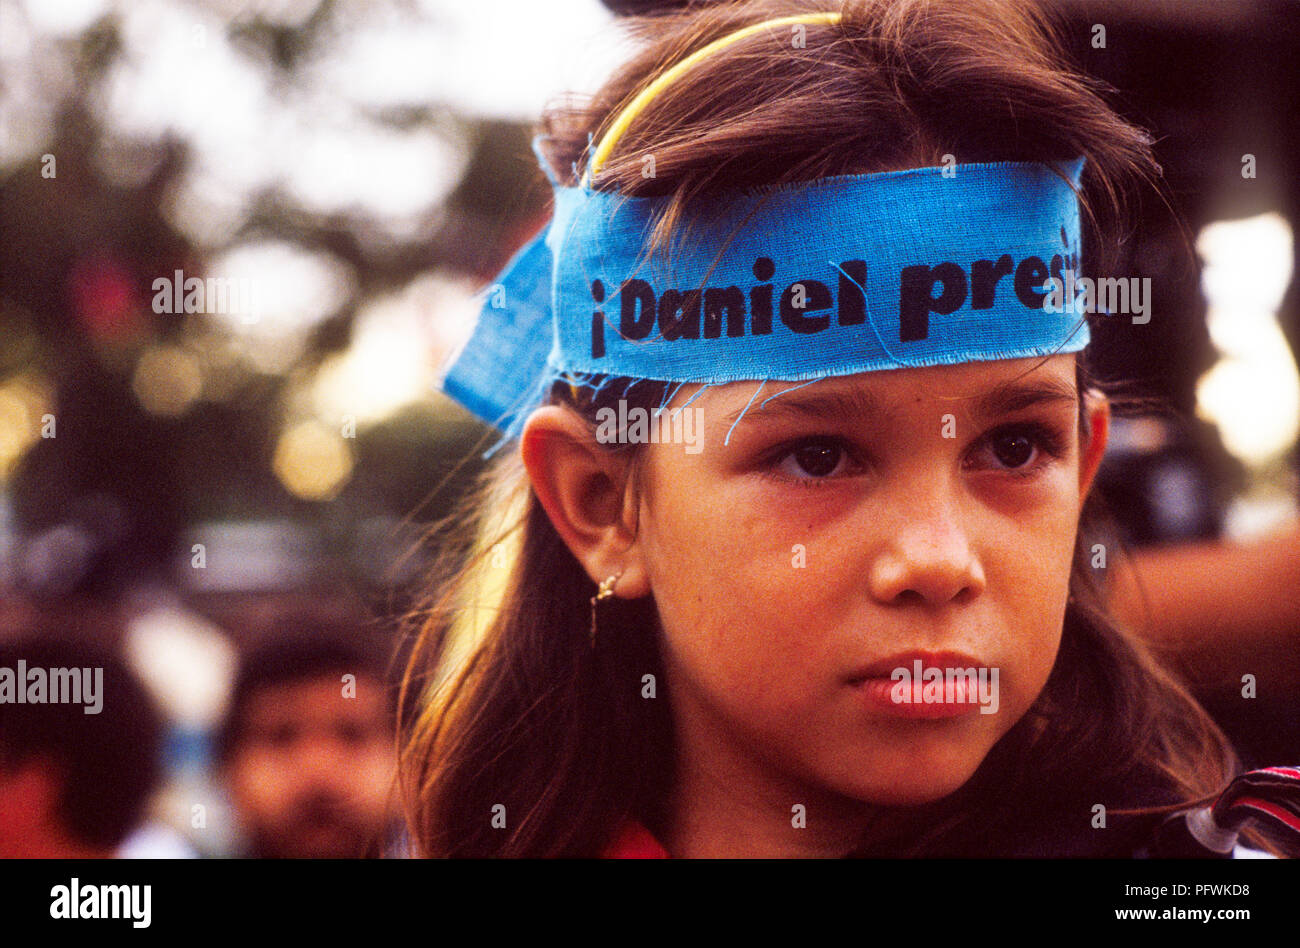 Managua, Nicaragua, elections, Feb 1990; A young girl wears a headband supporting the FSLN candidate Daniel Ortega for president. Stock Photo